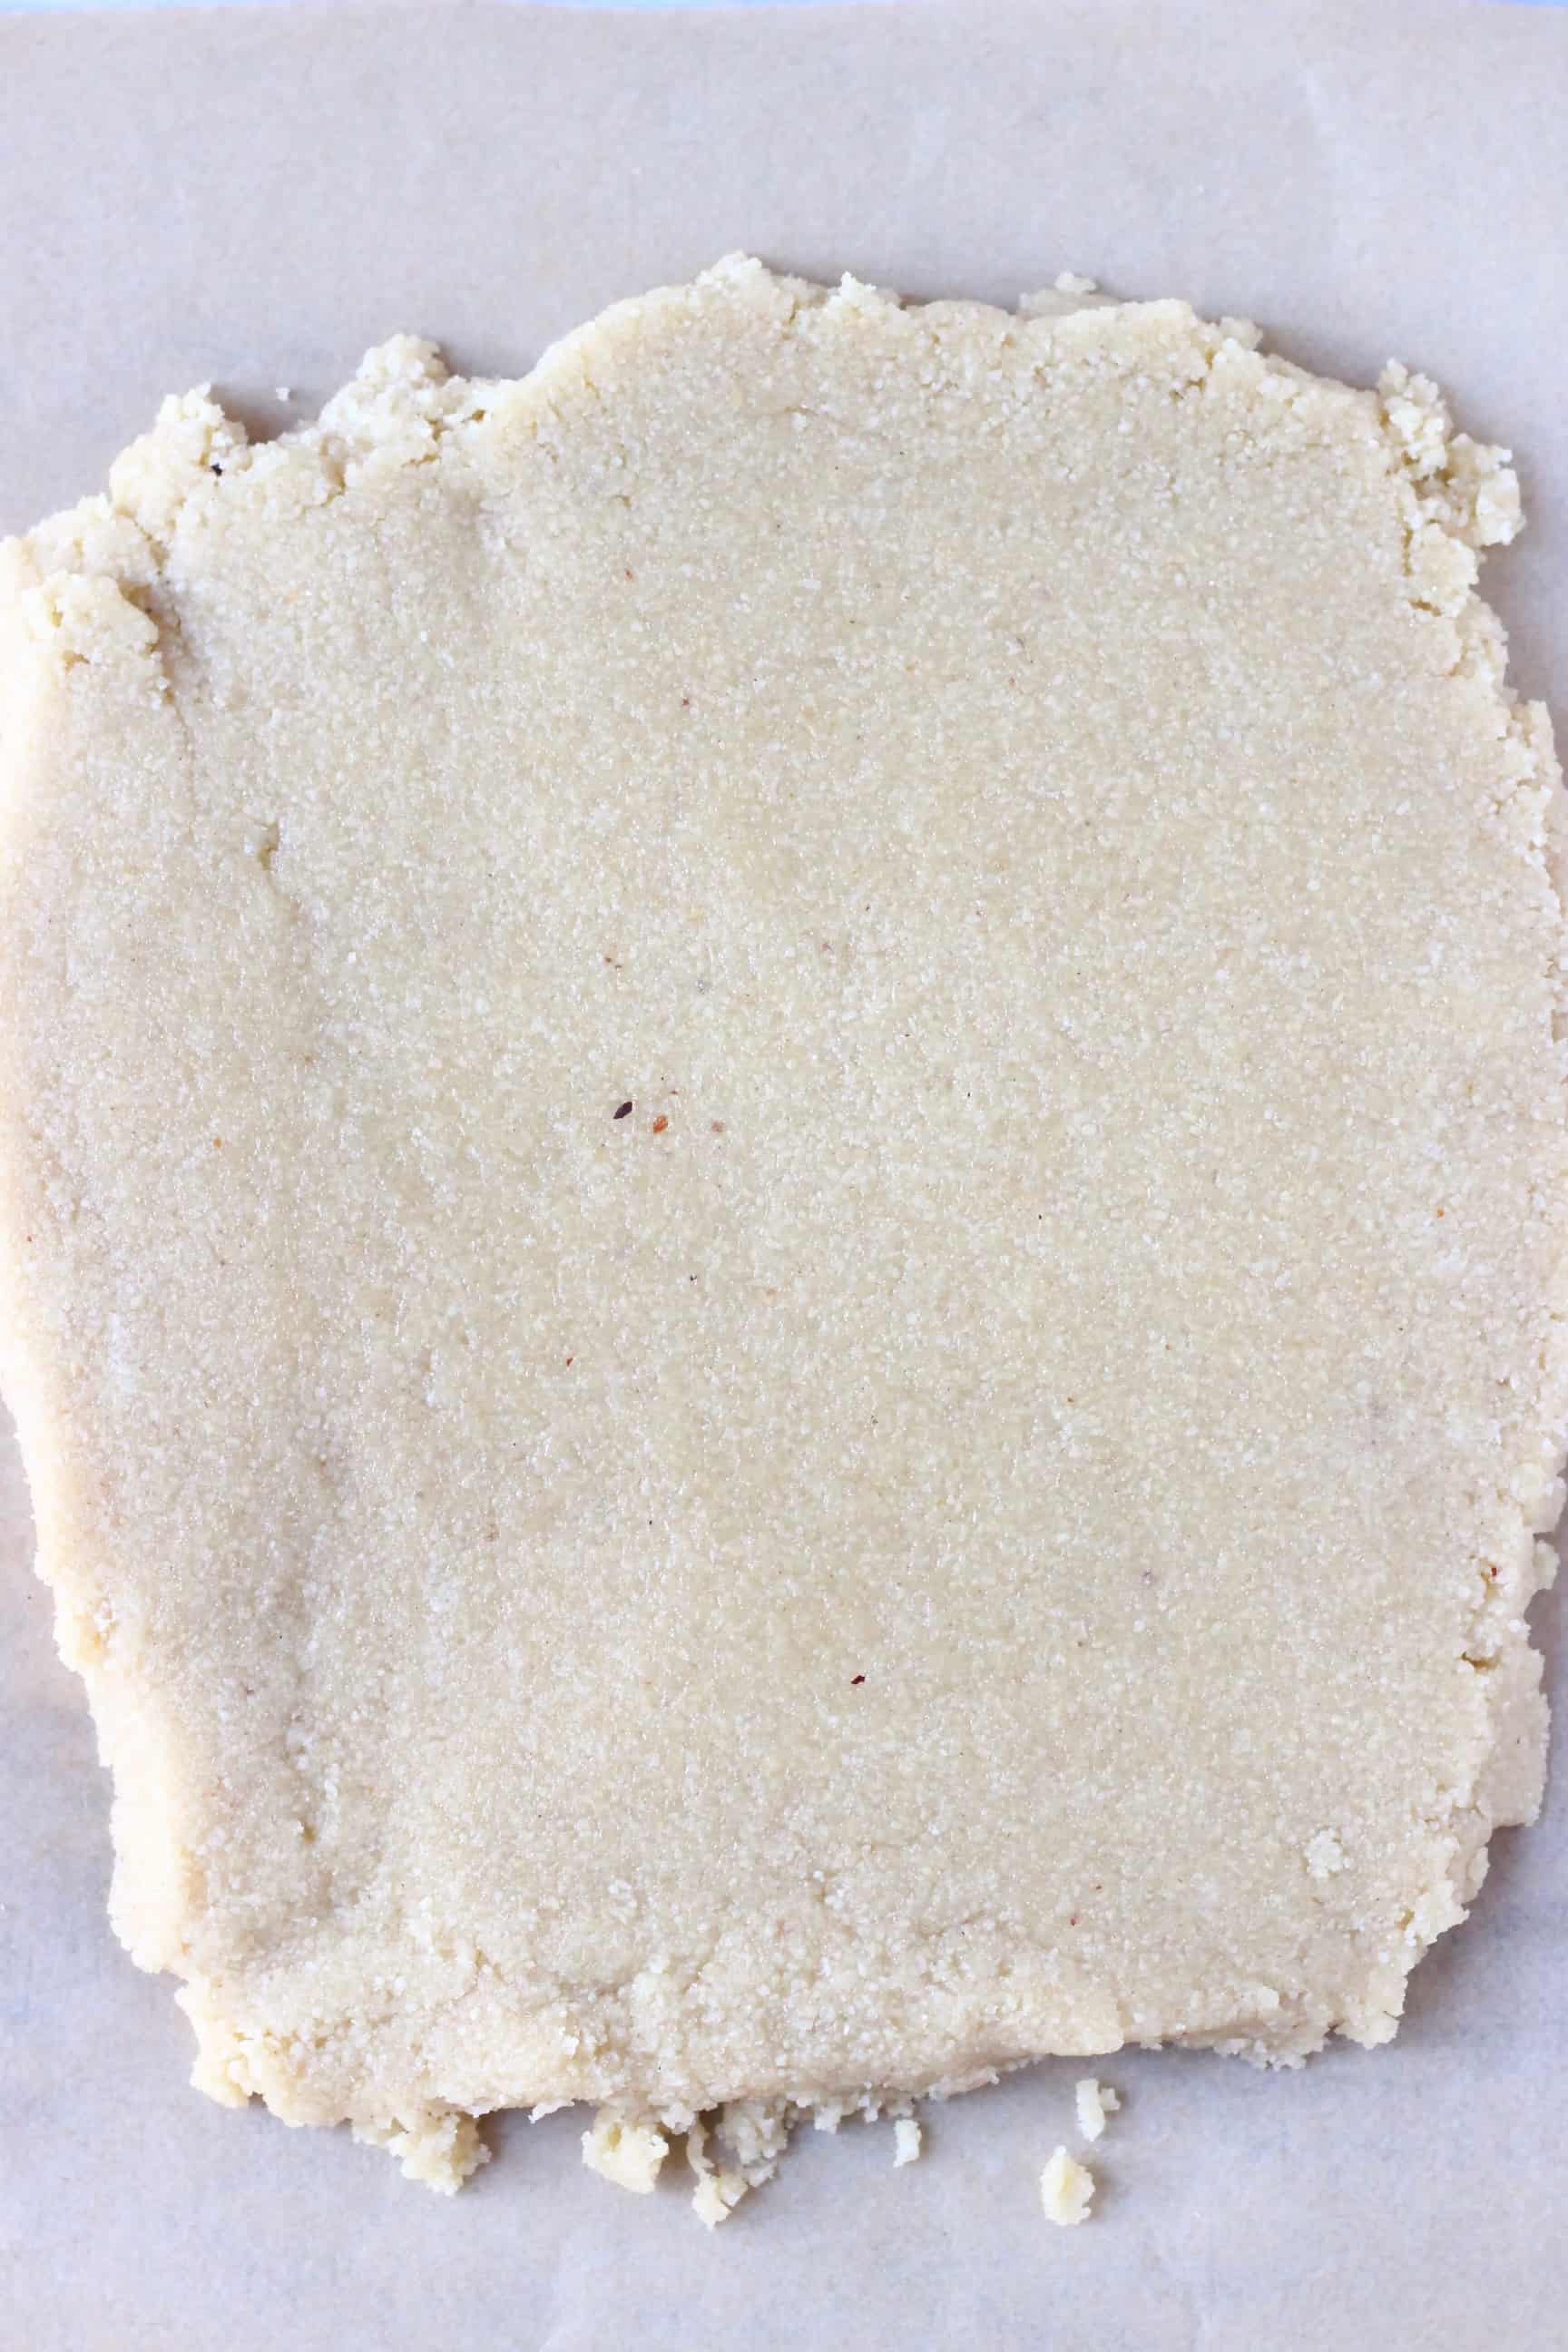 A square of raw vegan shortbread cookie dough rolled out on baking paper